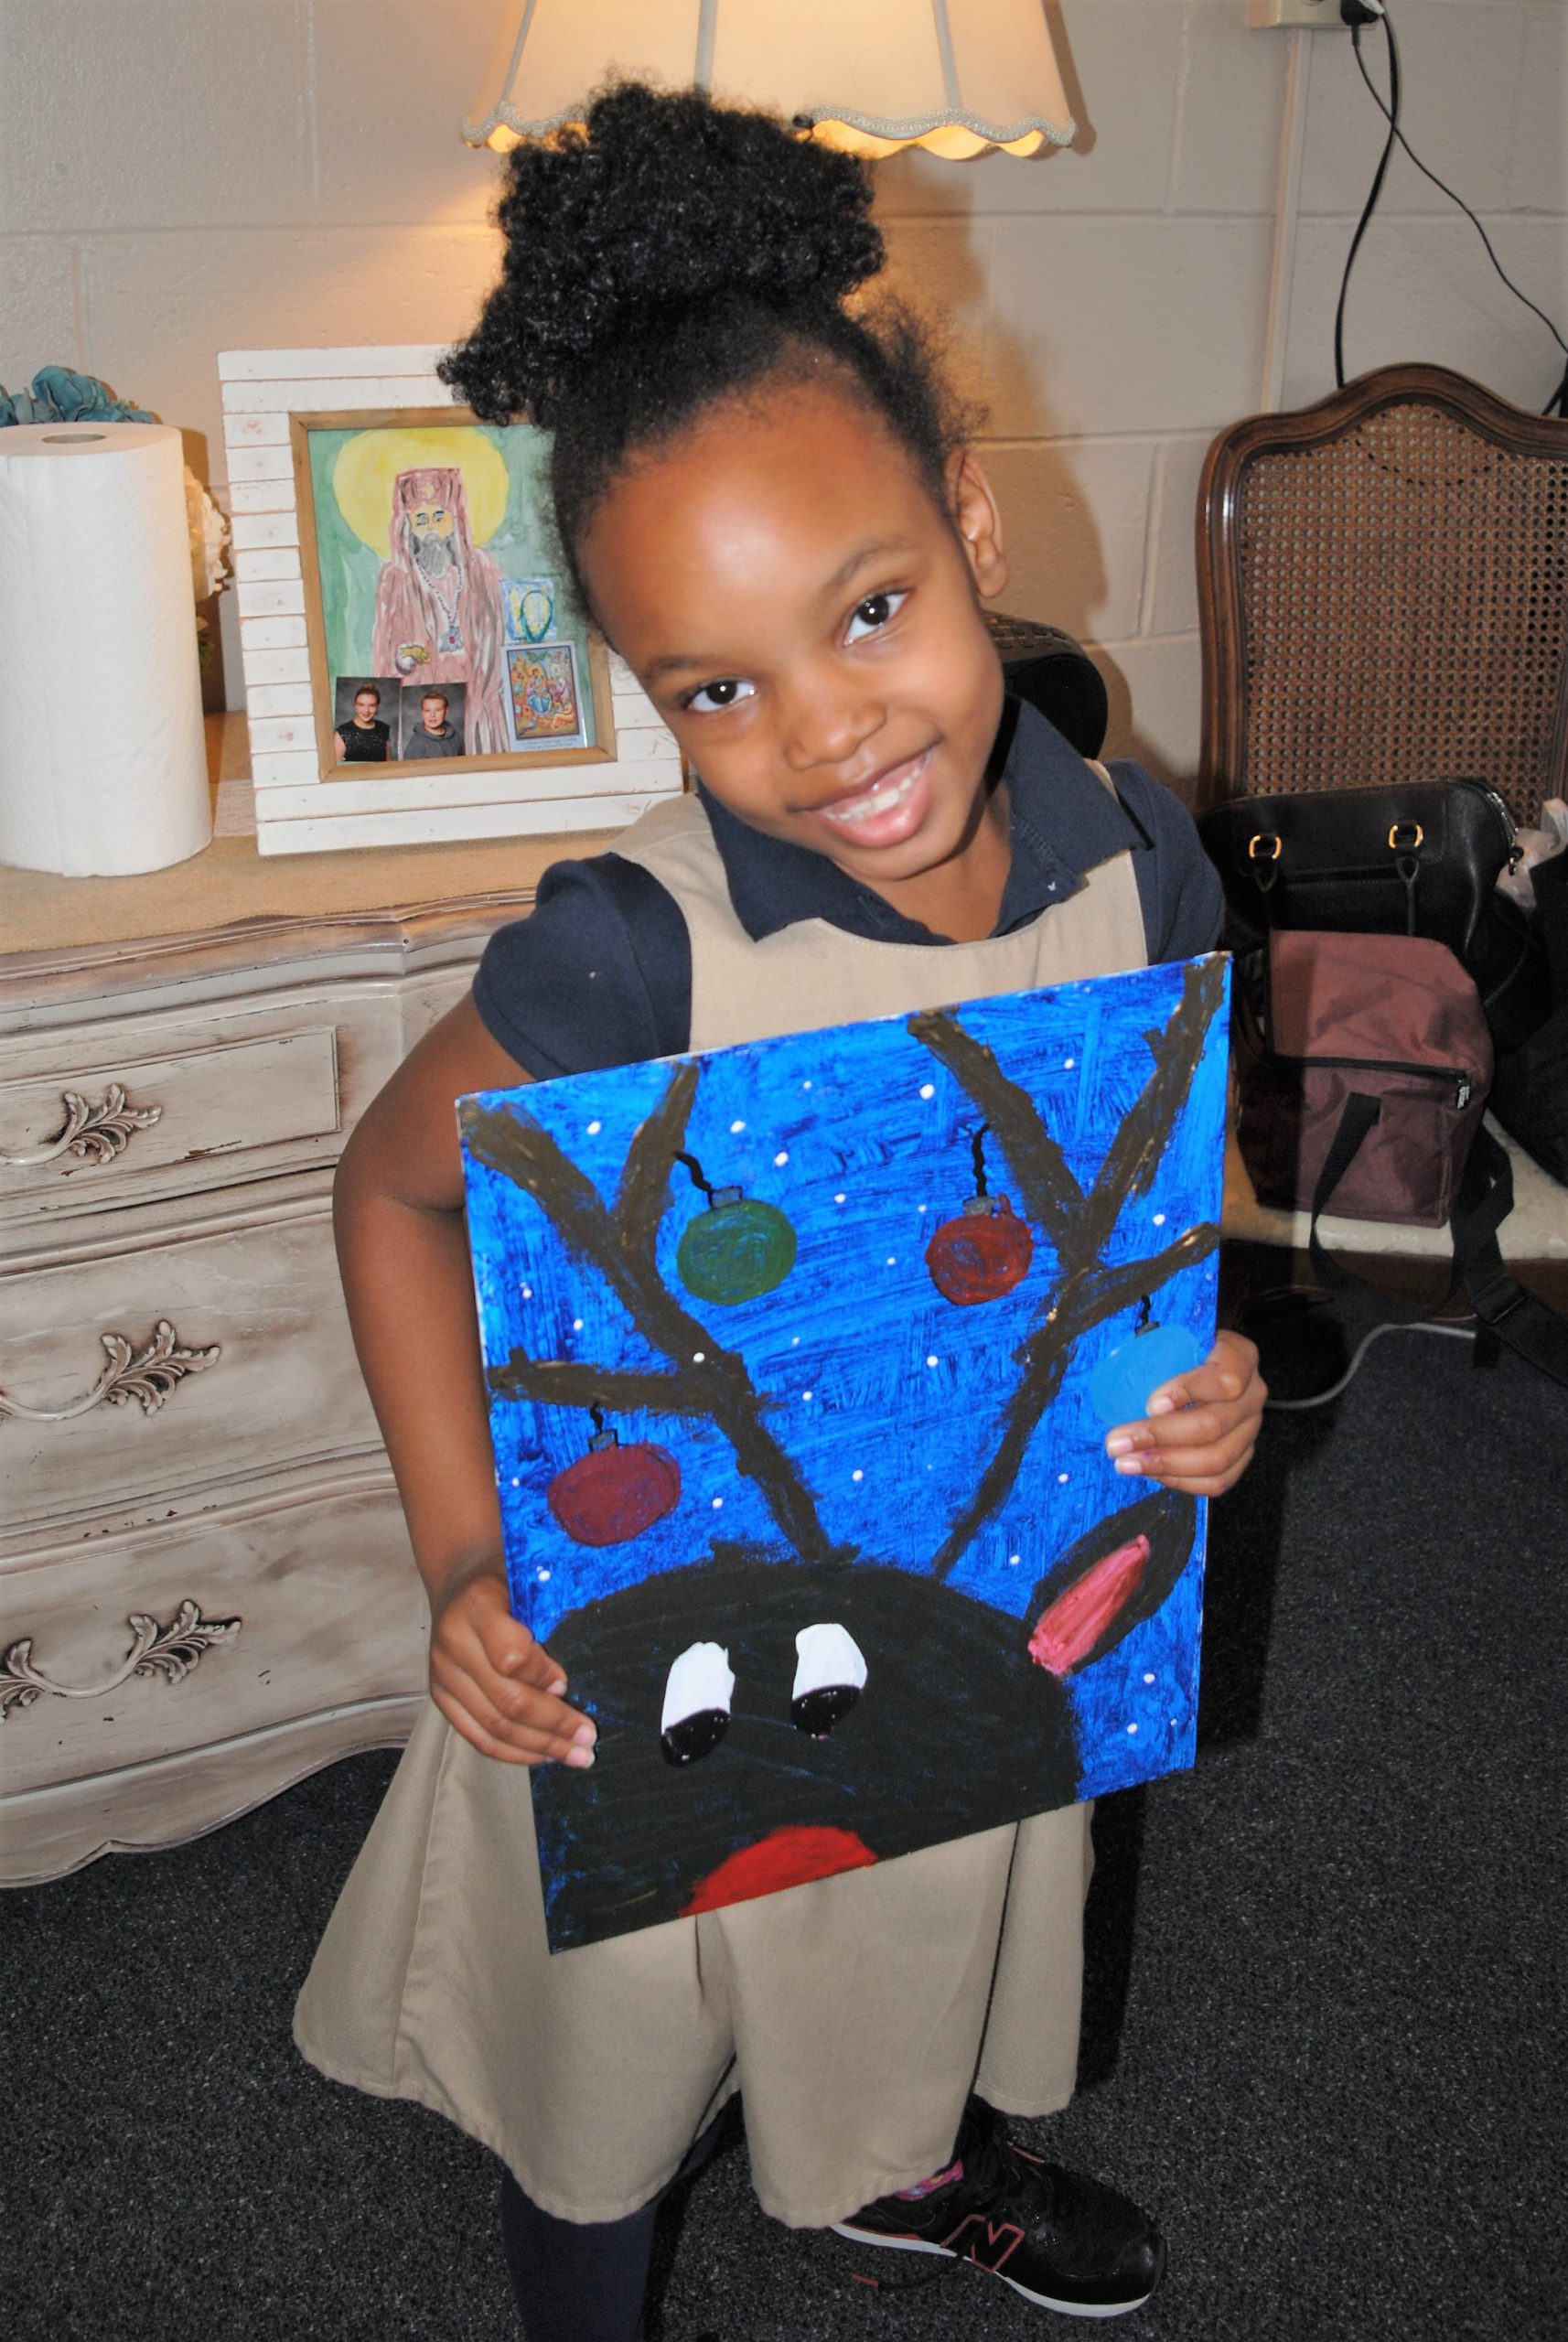 Student holds her hand-painted reindeer picture